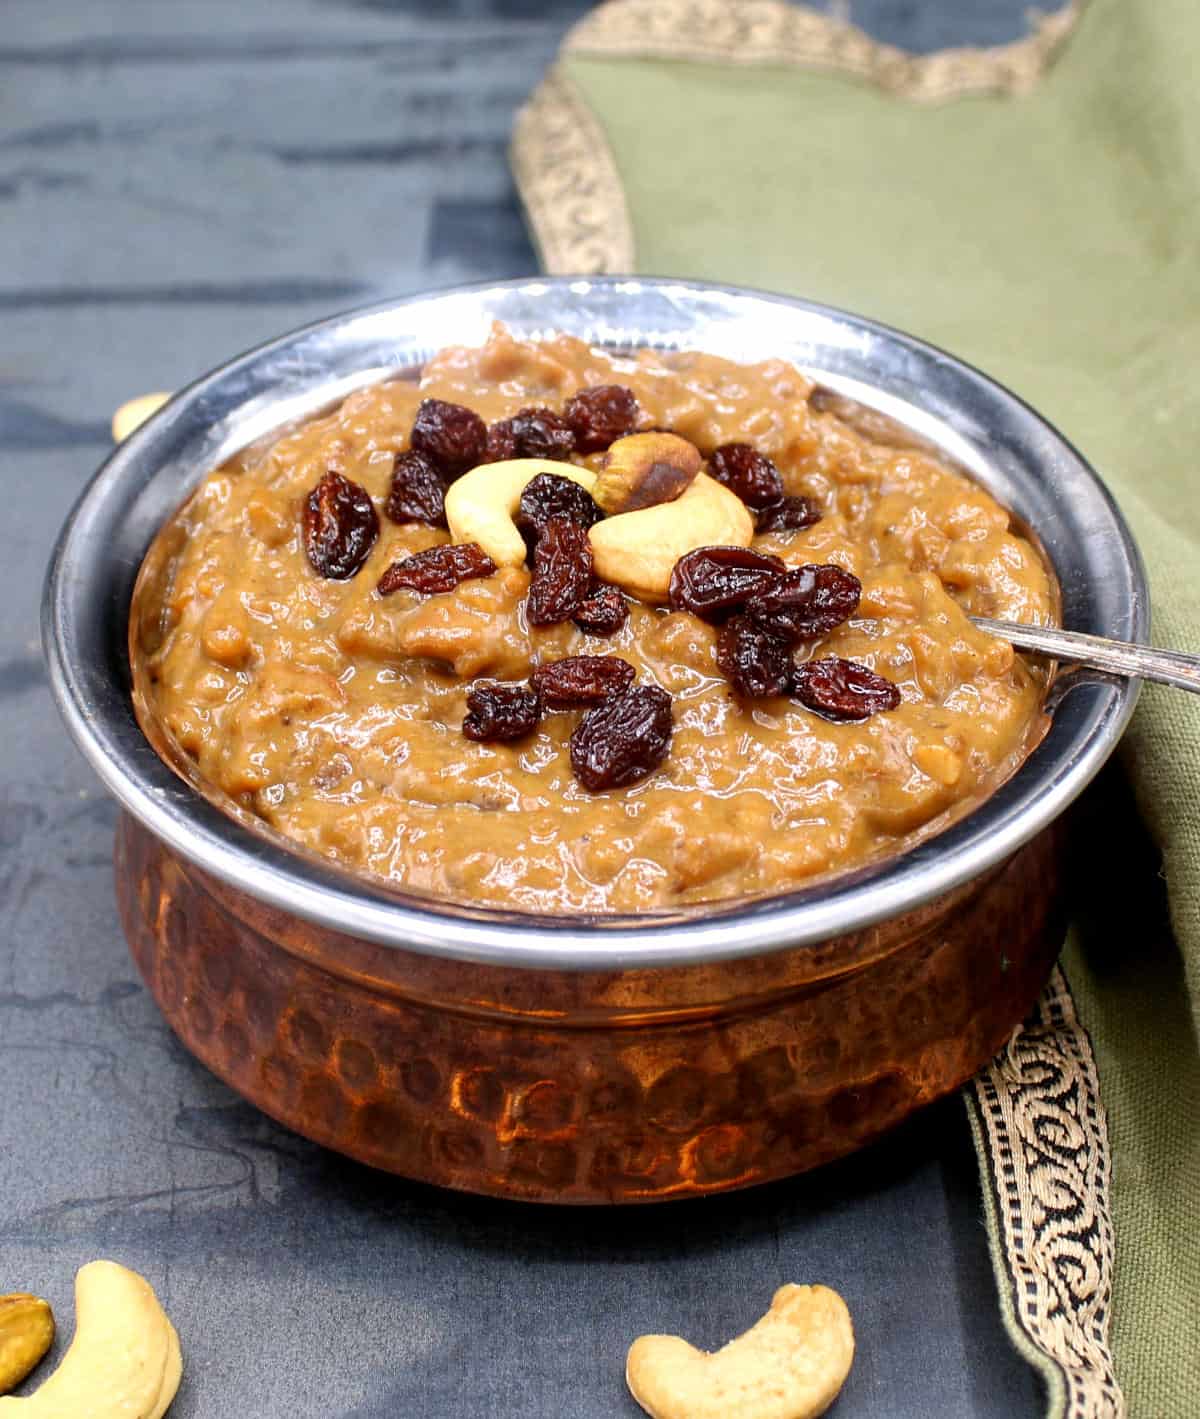 Vegan chakkara pongal in copper and steel bowl with a garnish of cashews and raisins.